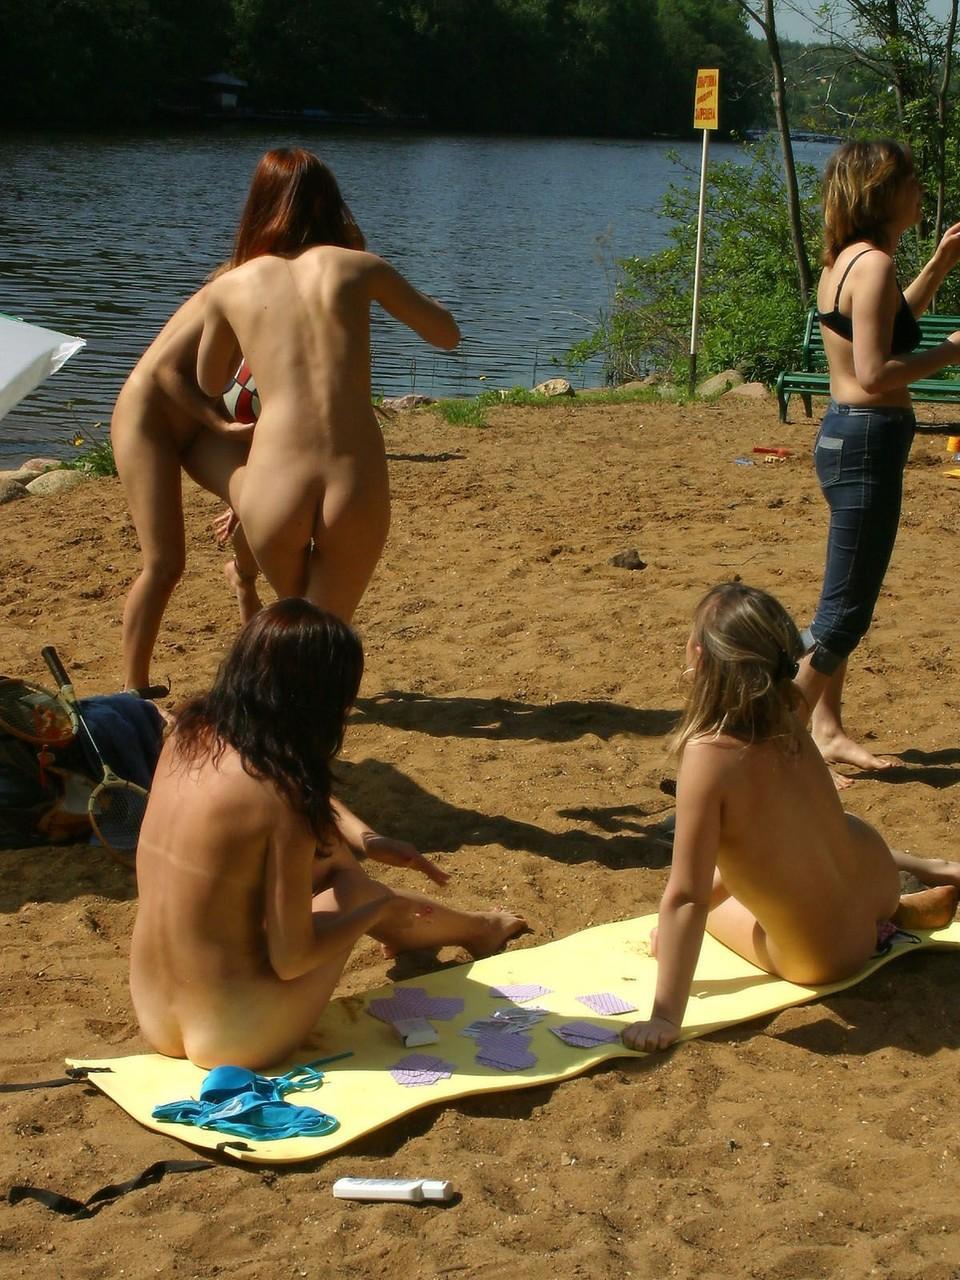 Naughty skinny babes show off their small tits outdoors while naked(6)